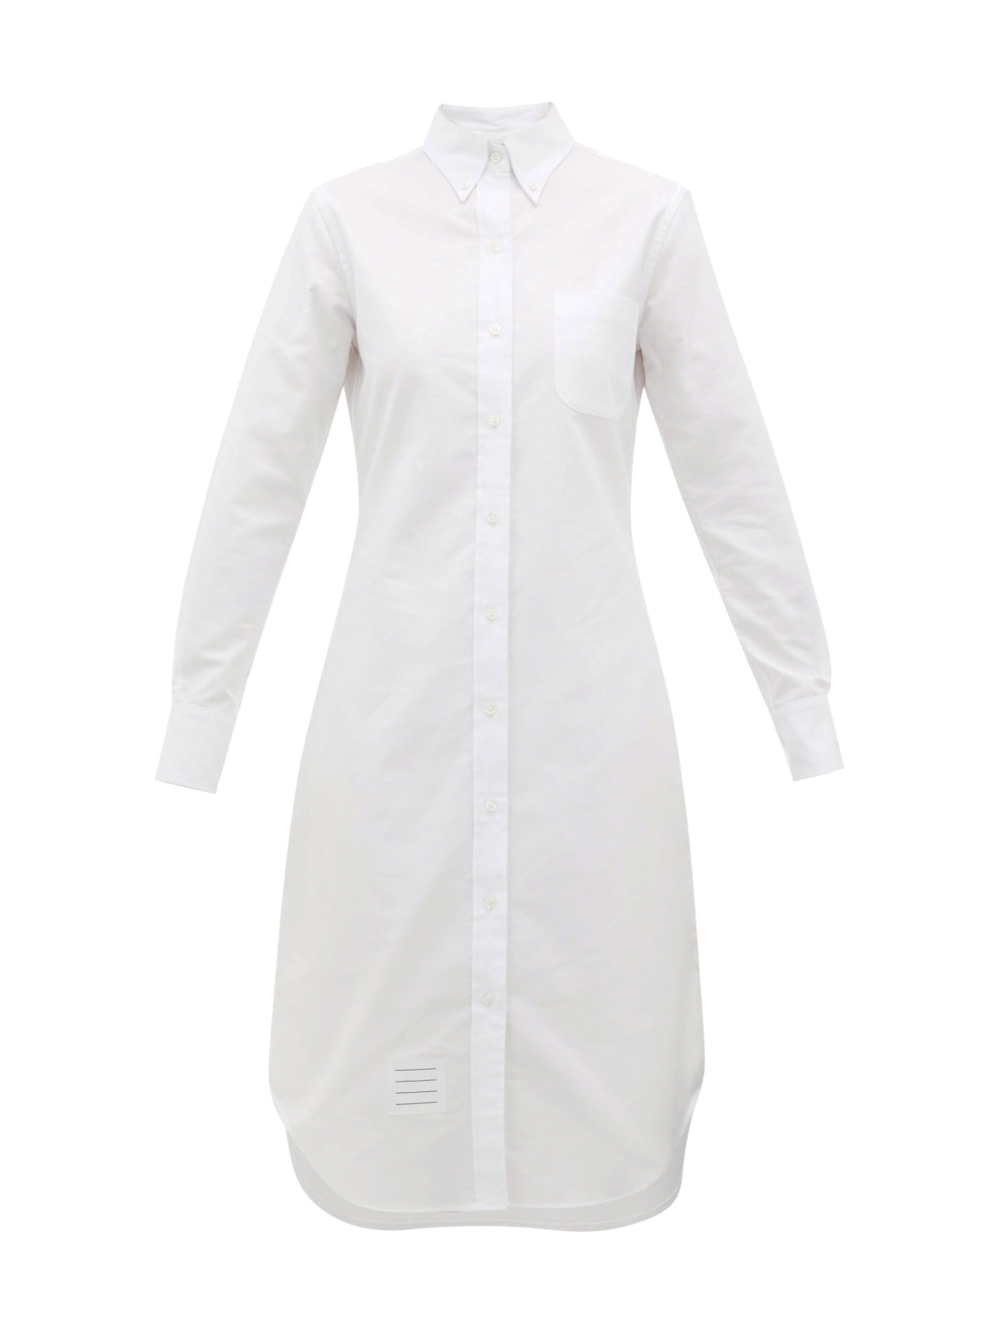 Robes chemises blanches pour femme